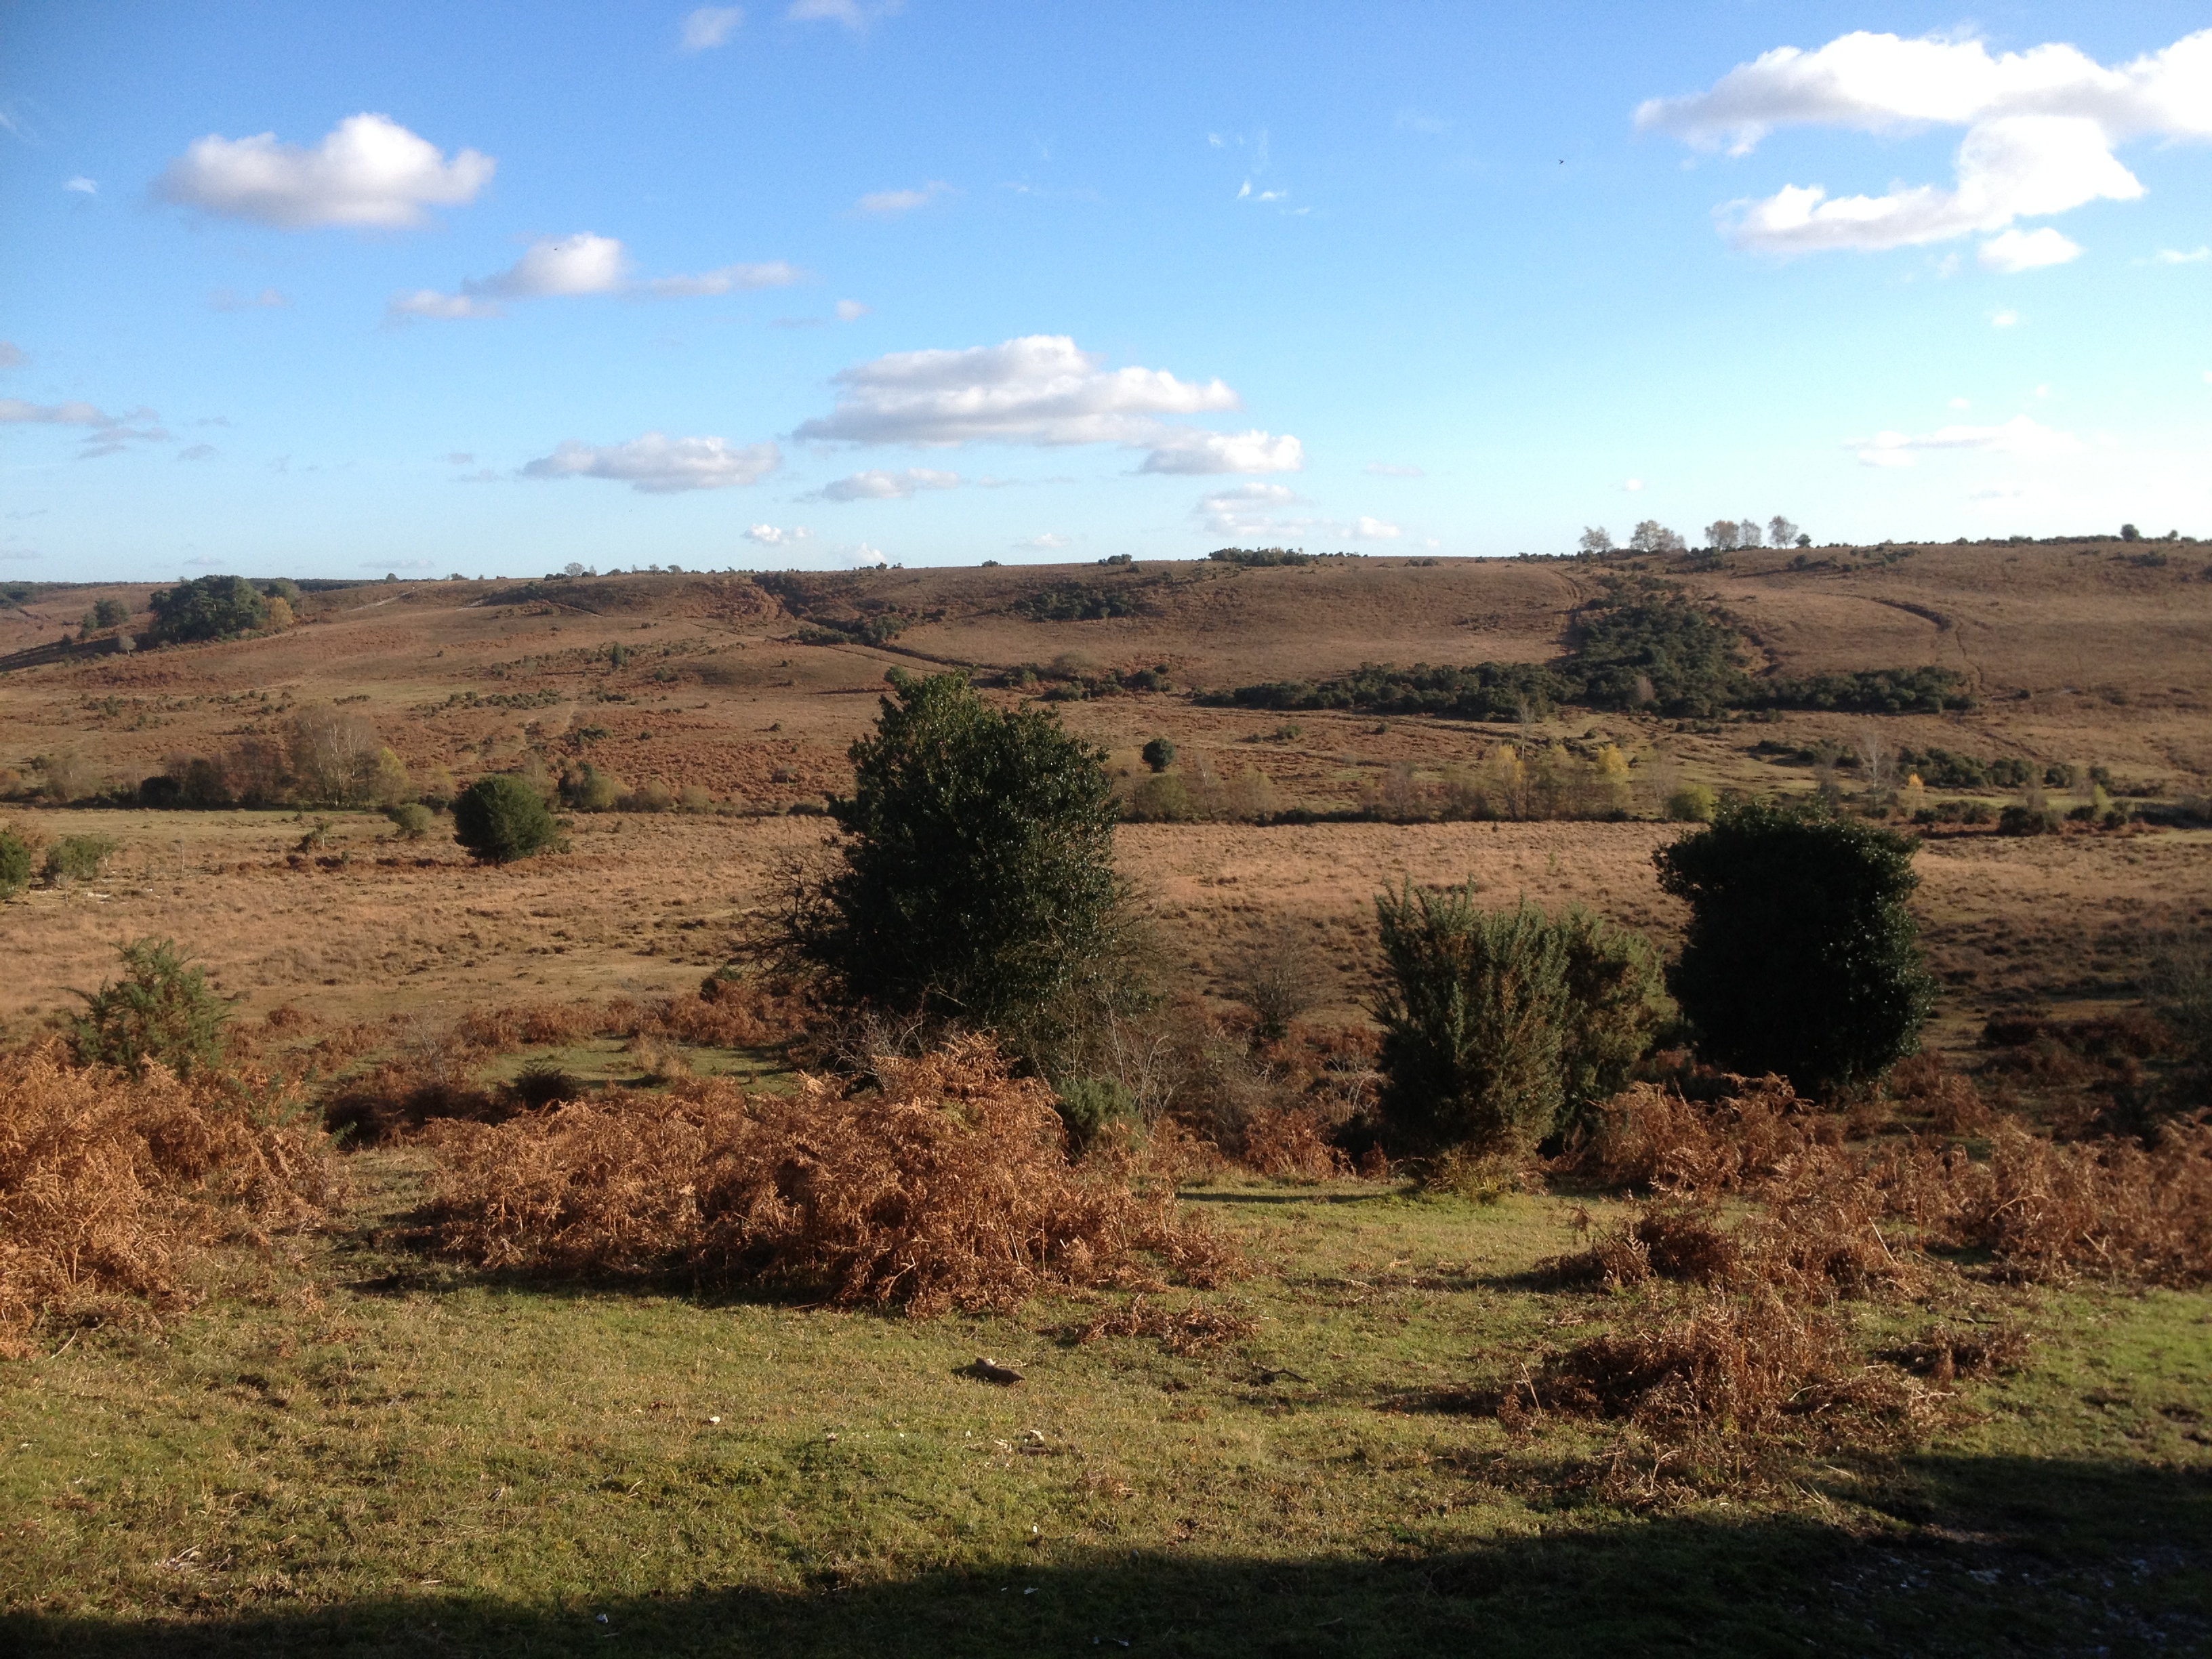 The New Forest has 13.5 million day visits each year.